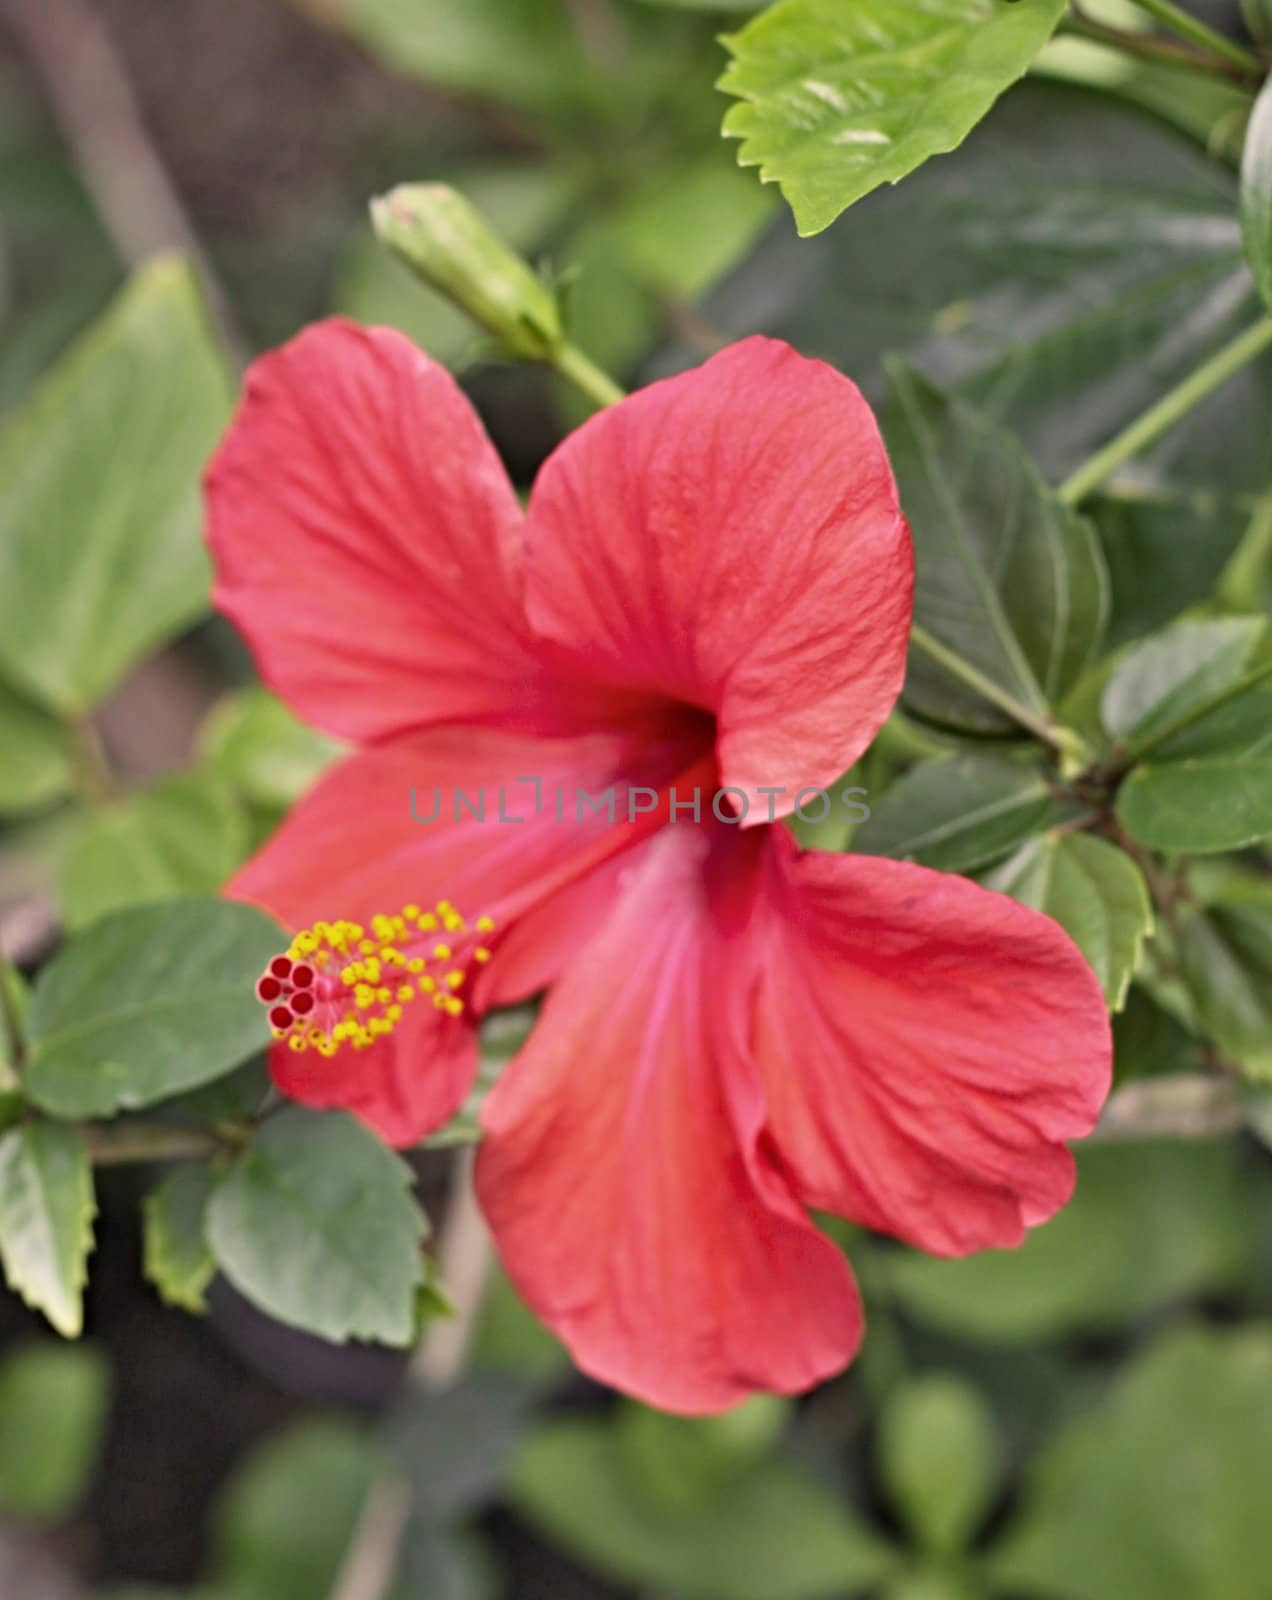 Rose Hibiscus flower and green leaves